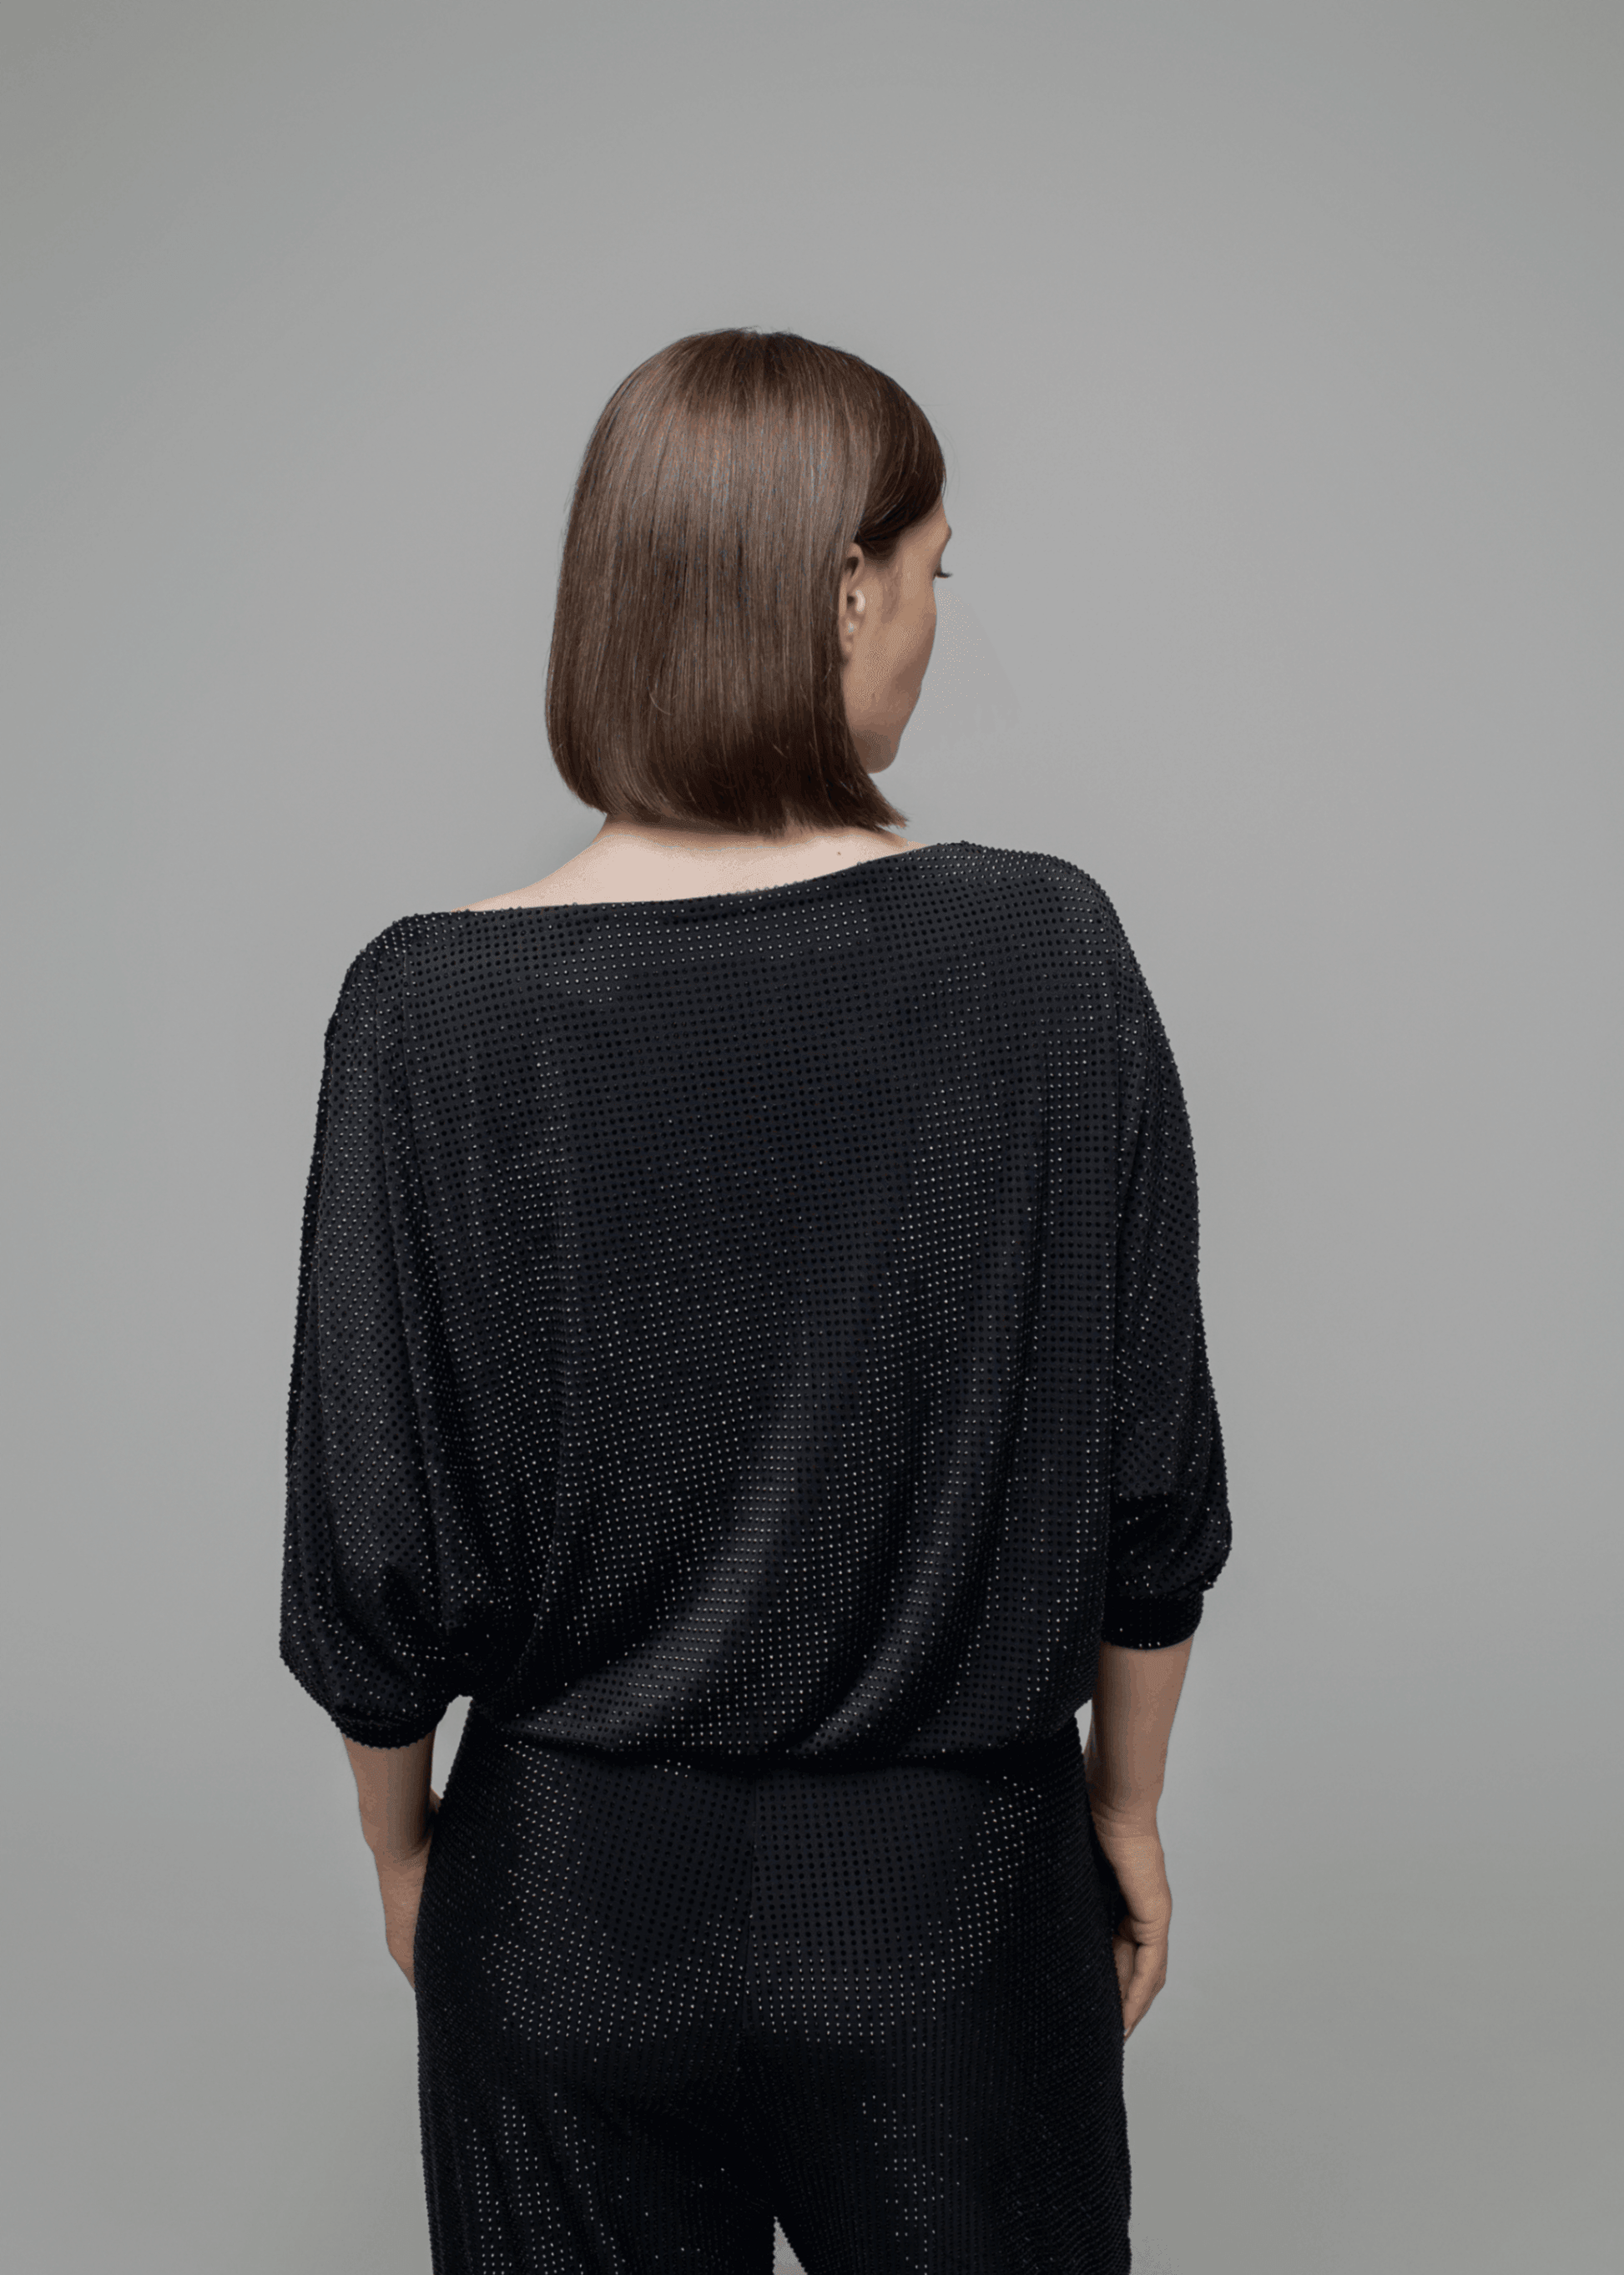 Exquisite detail of Axinia Crystal Cowlneck Three Quarter Dolman Sleeves showcasing the fine craftsmanship and elegant design characteristic of Axinia Collection 's luxury collection.